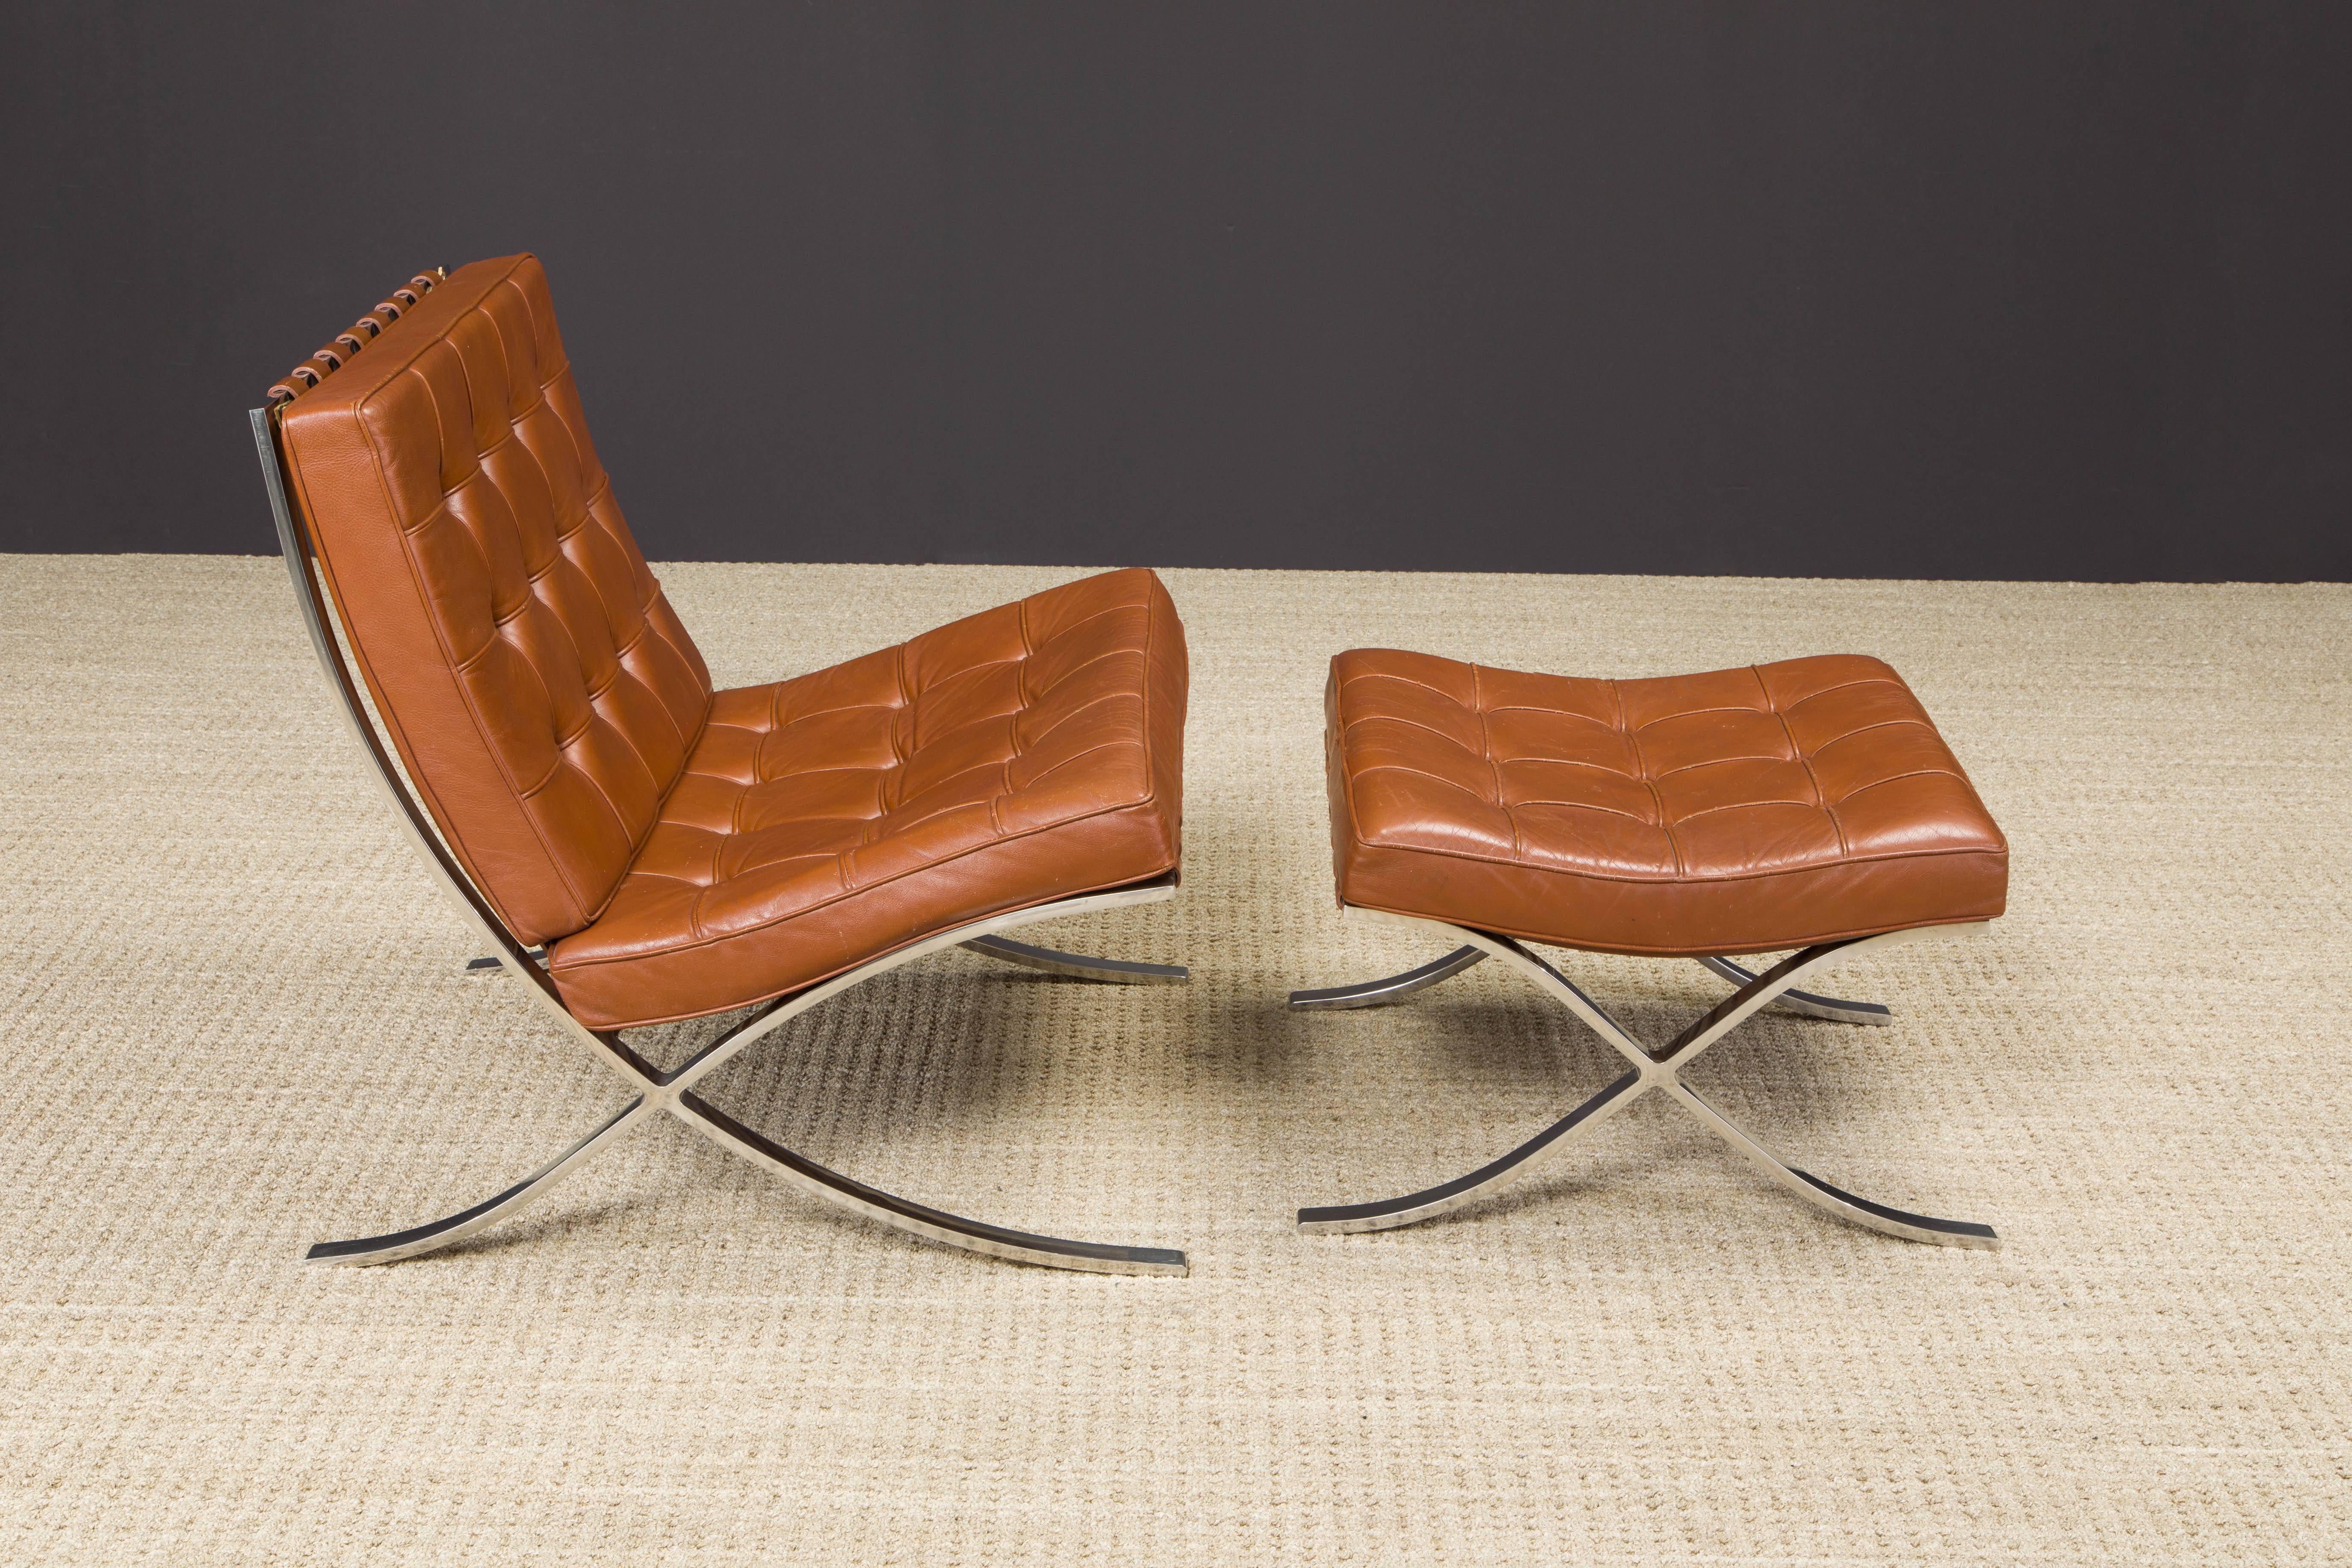 Stainless Steel 1st-Gen Knoll Barcelona Lounge Set by Mies Van Der Rohe, c. 1968, Double-Signed